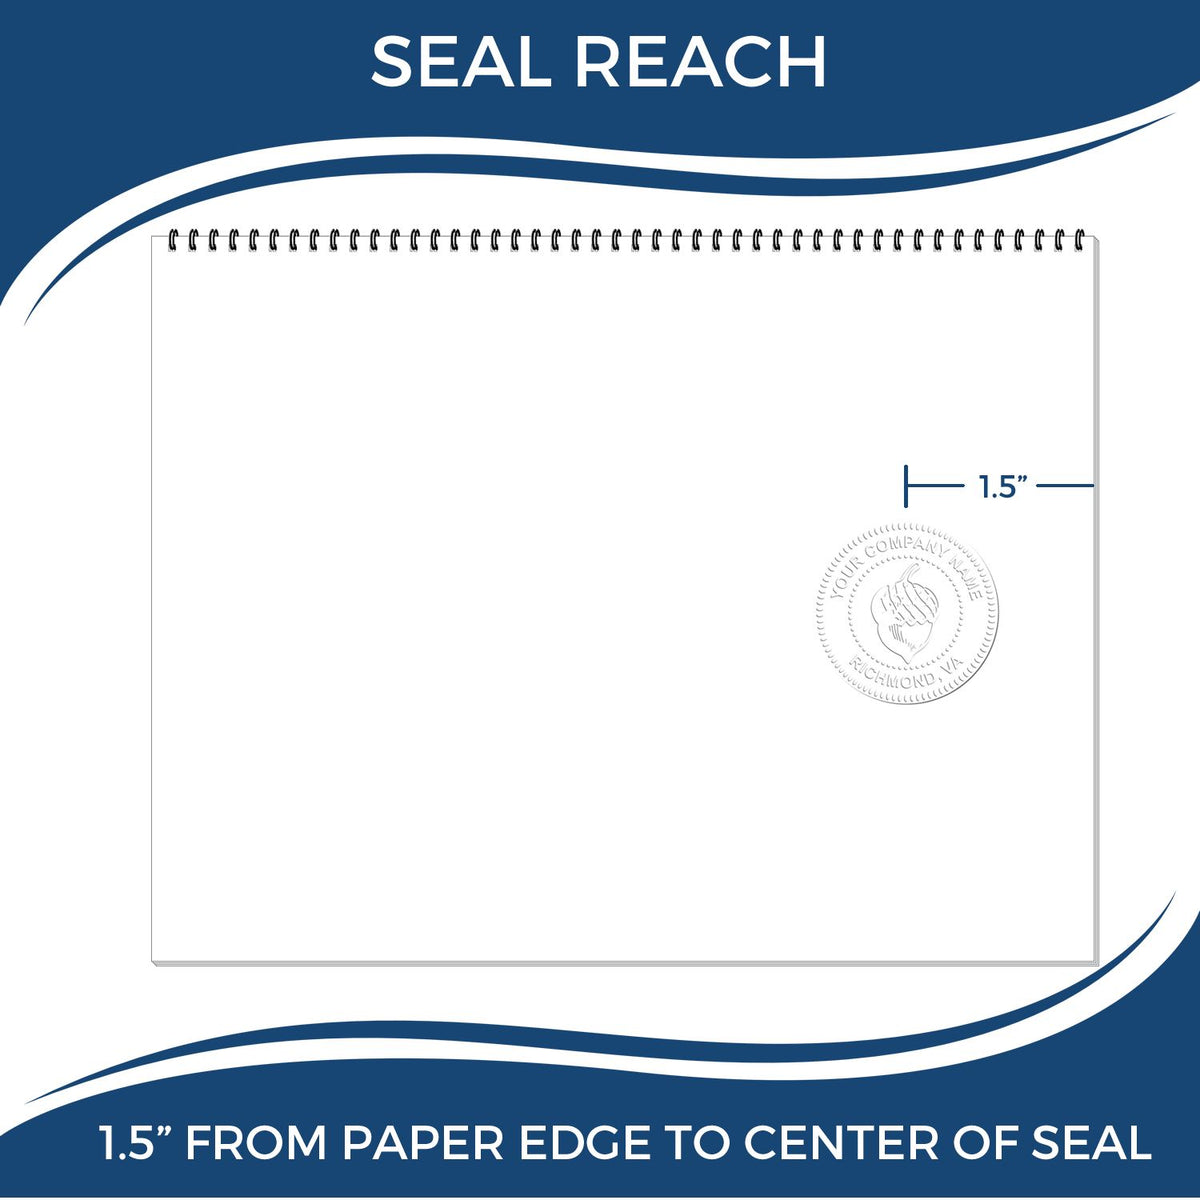 An infographic showing the seal reach which is represented by a ruler and a miniature seal image of the Hybrid Kentucky Landscape Architect Seal